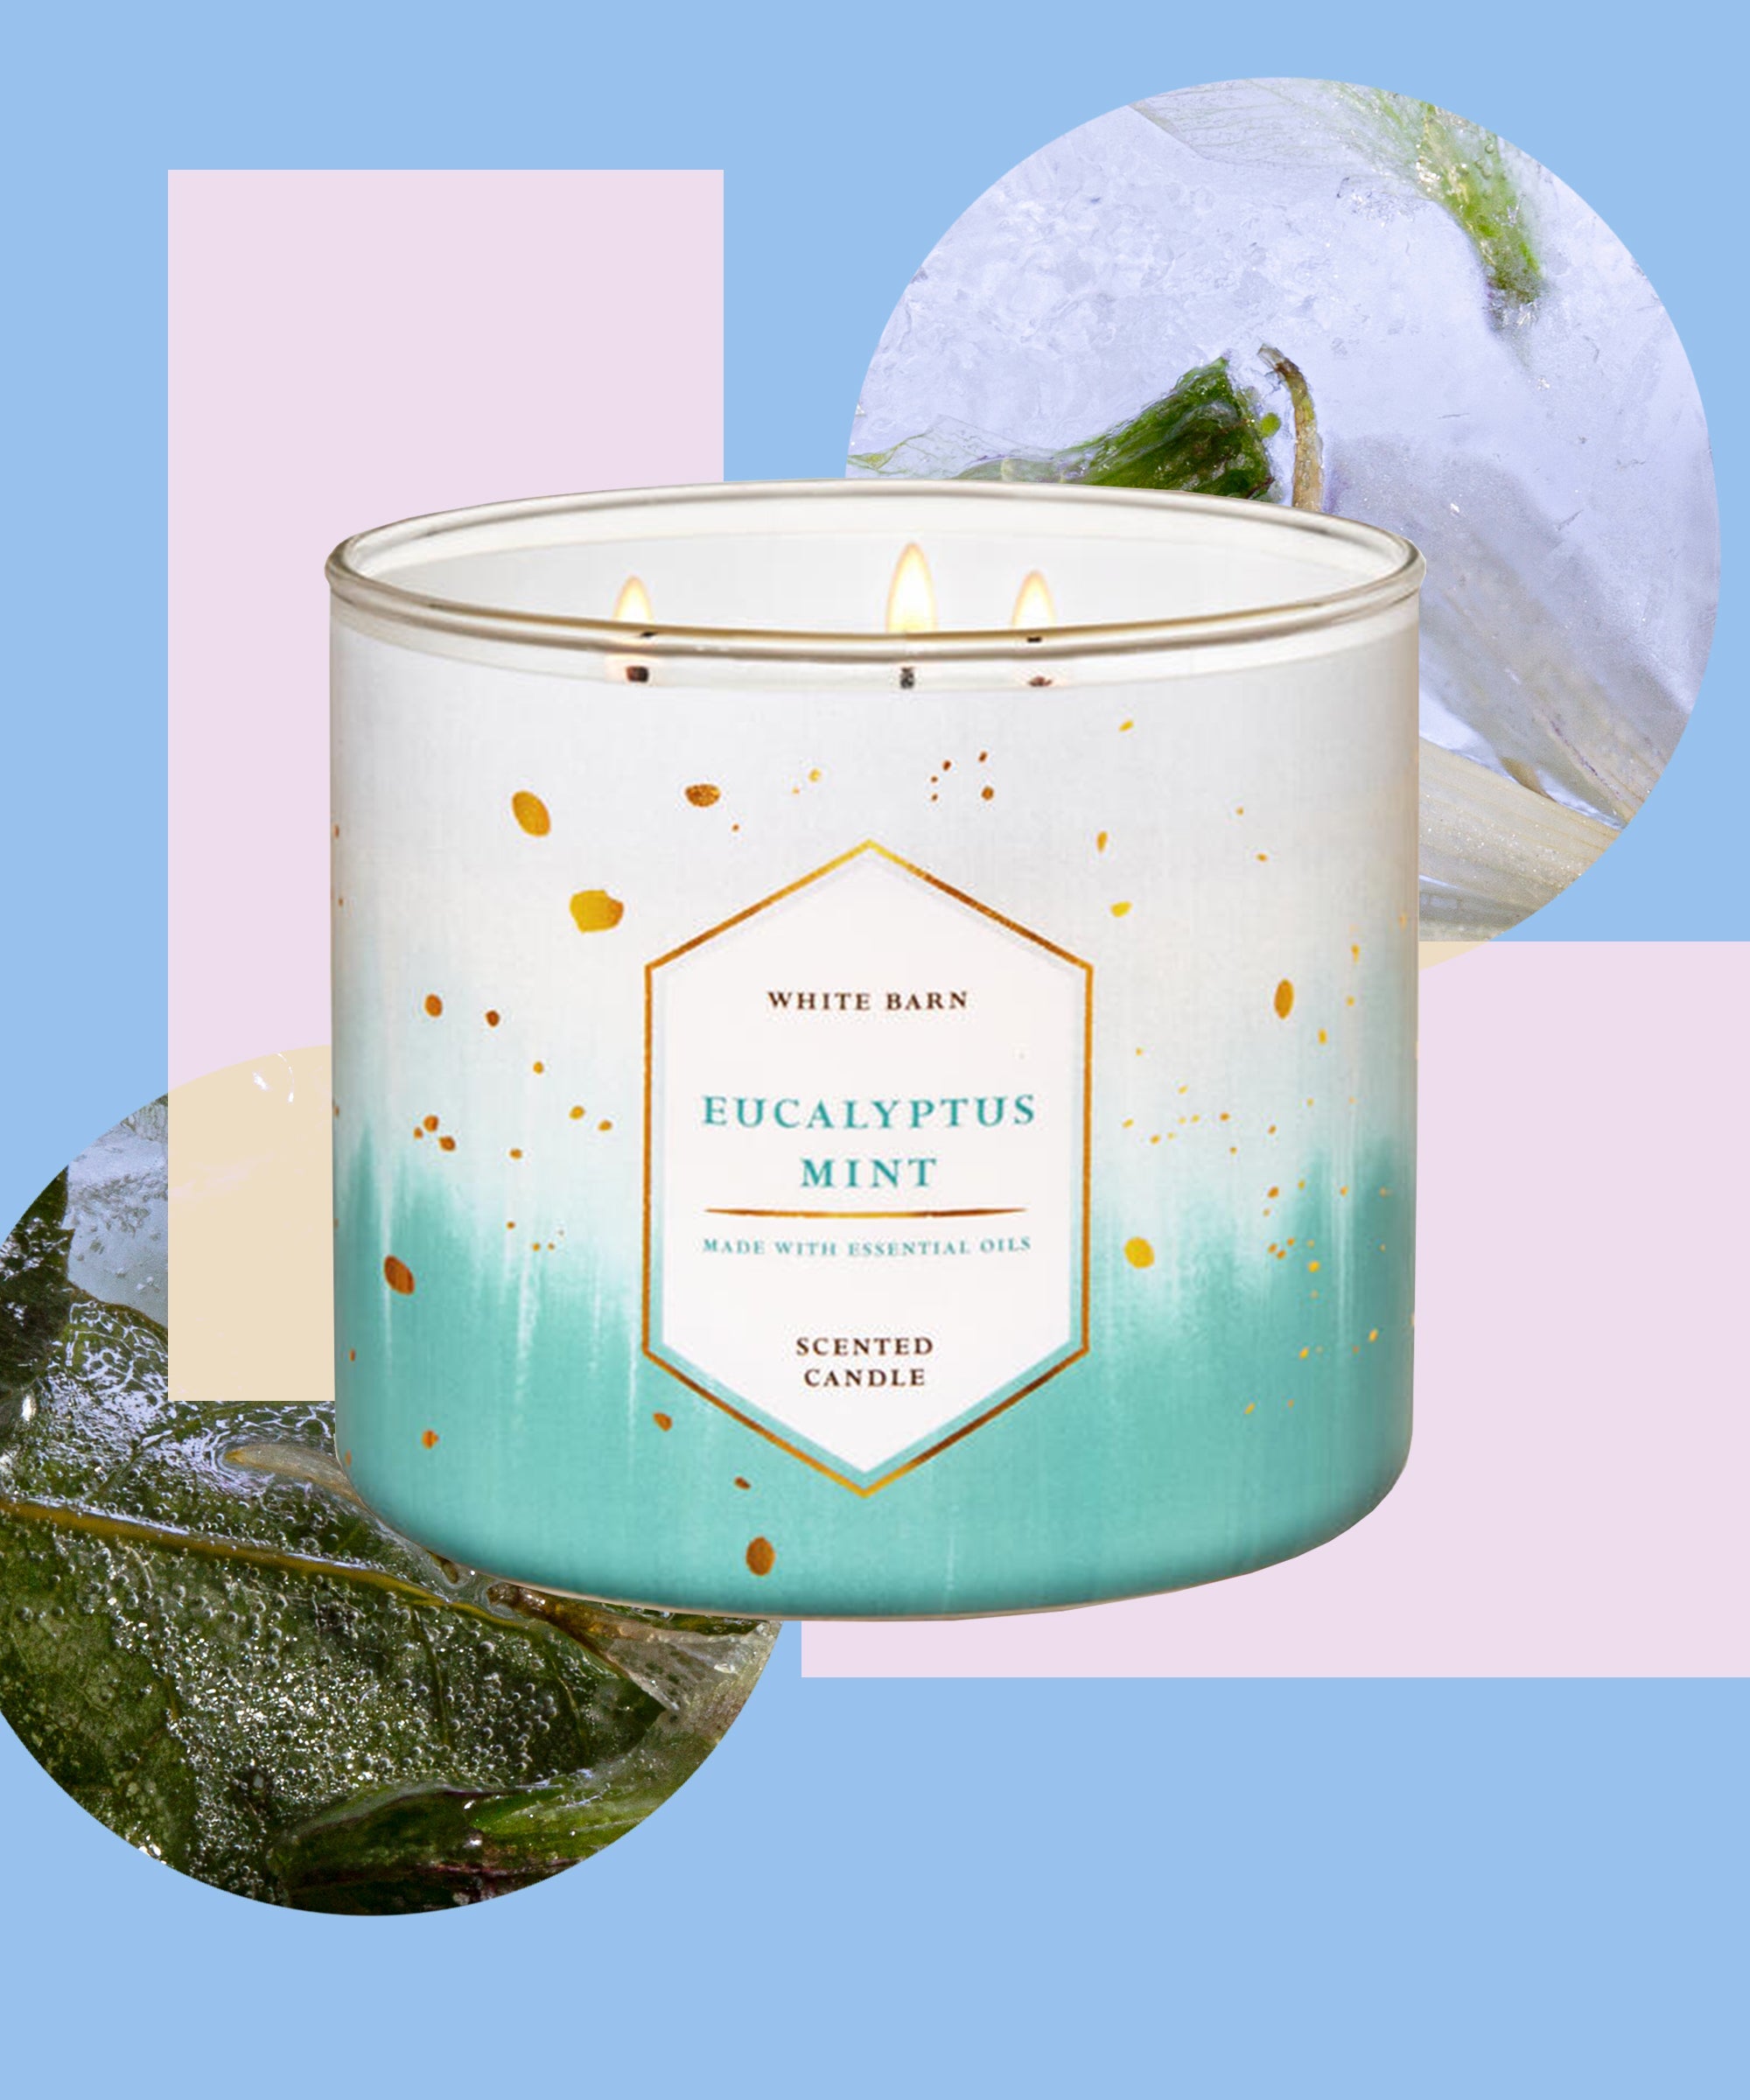 are bath and body works candles bad for dogs